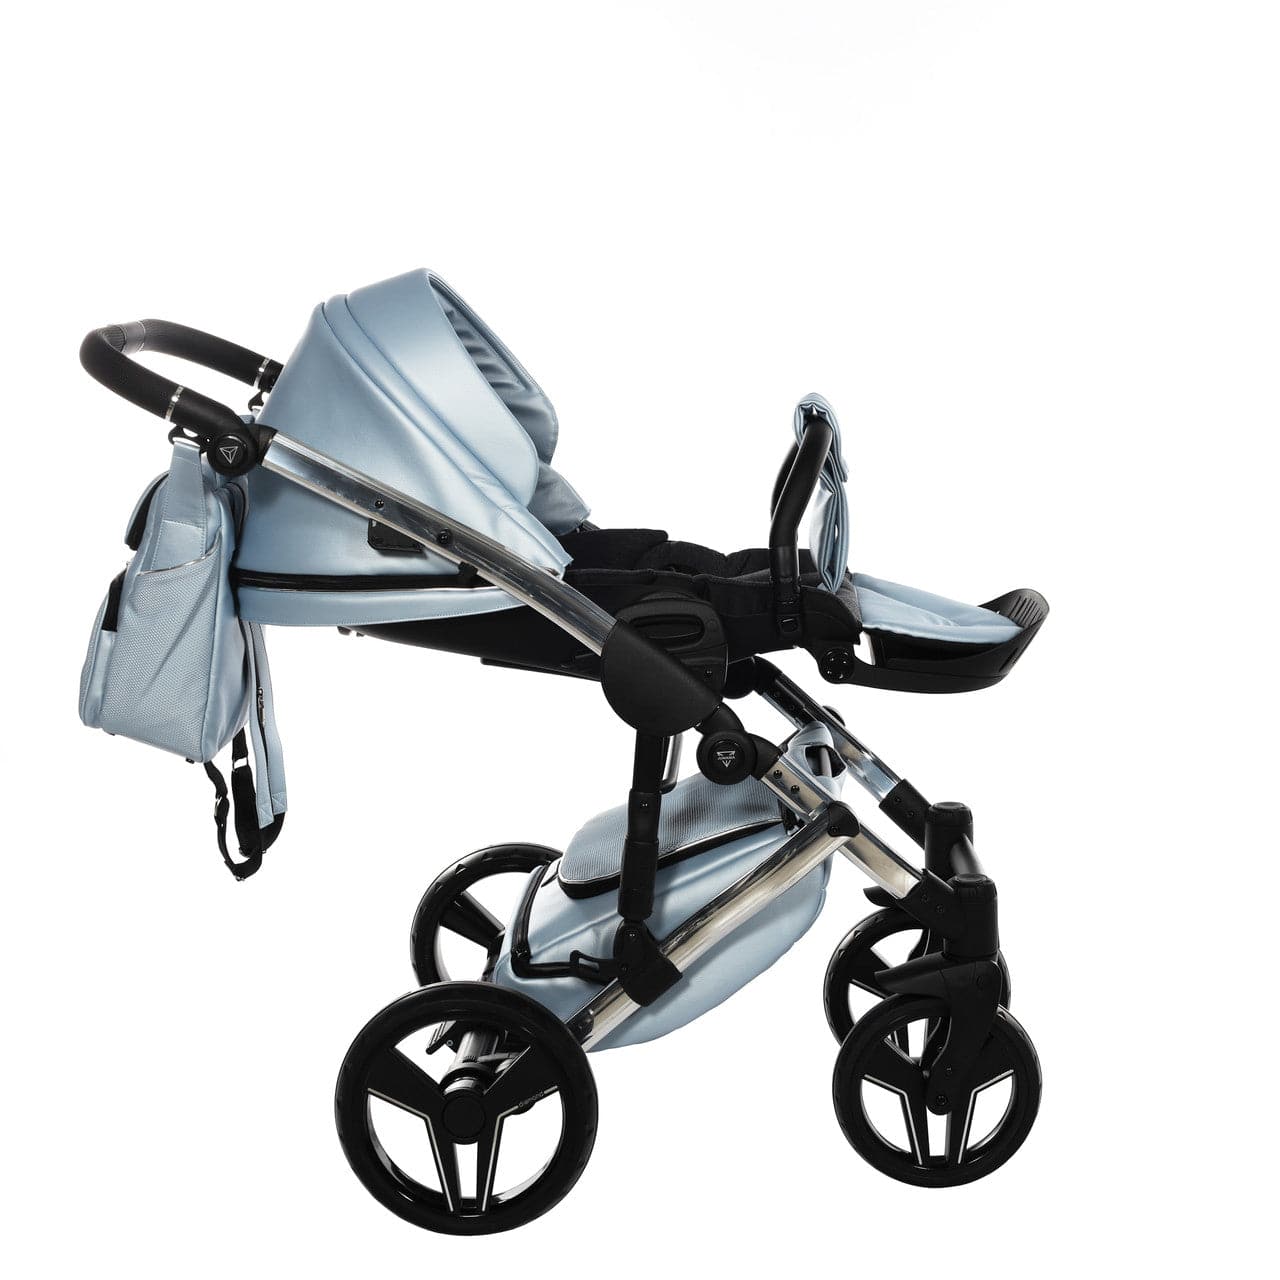 Junama S-Class 3 In 1 Travel System - Sky Blue - For Your Little One